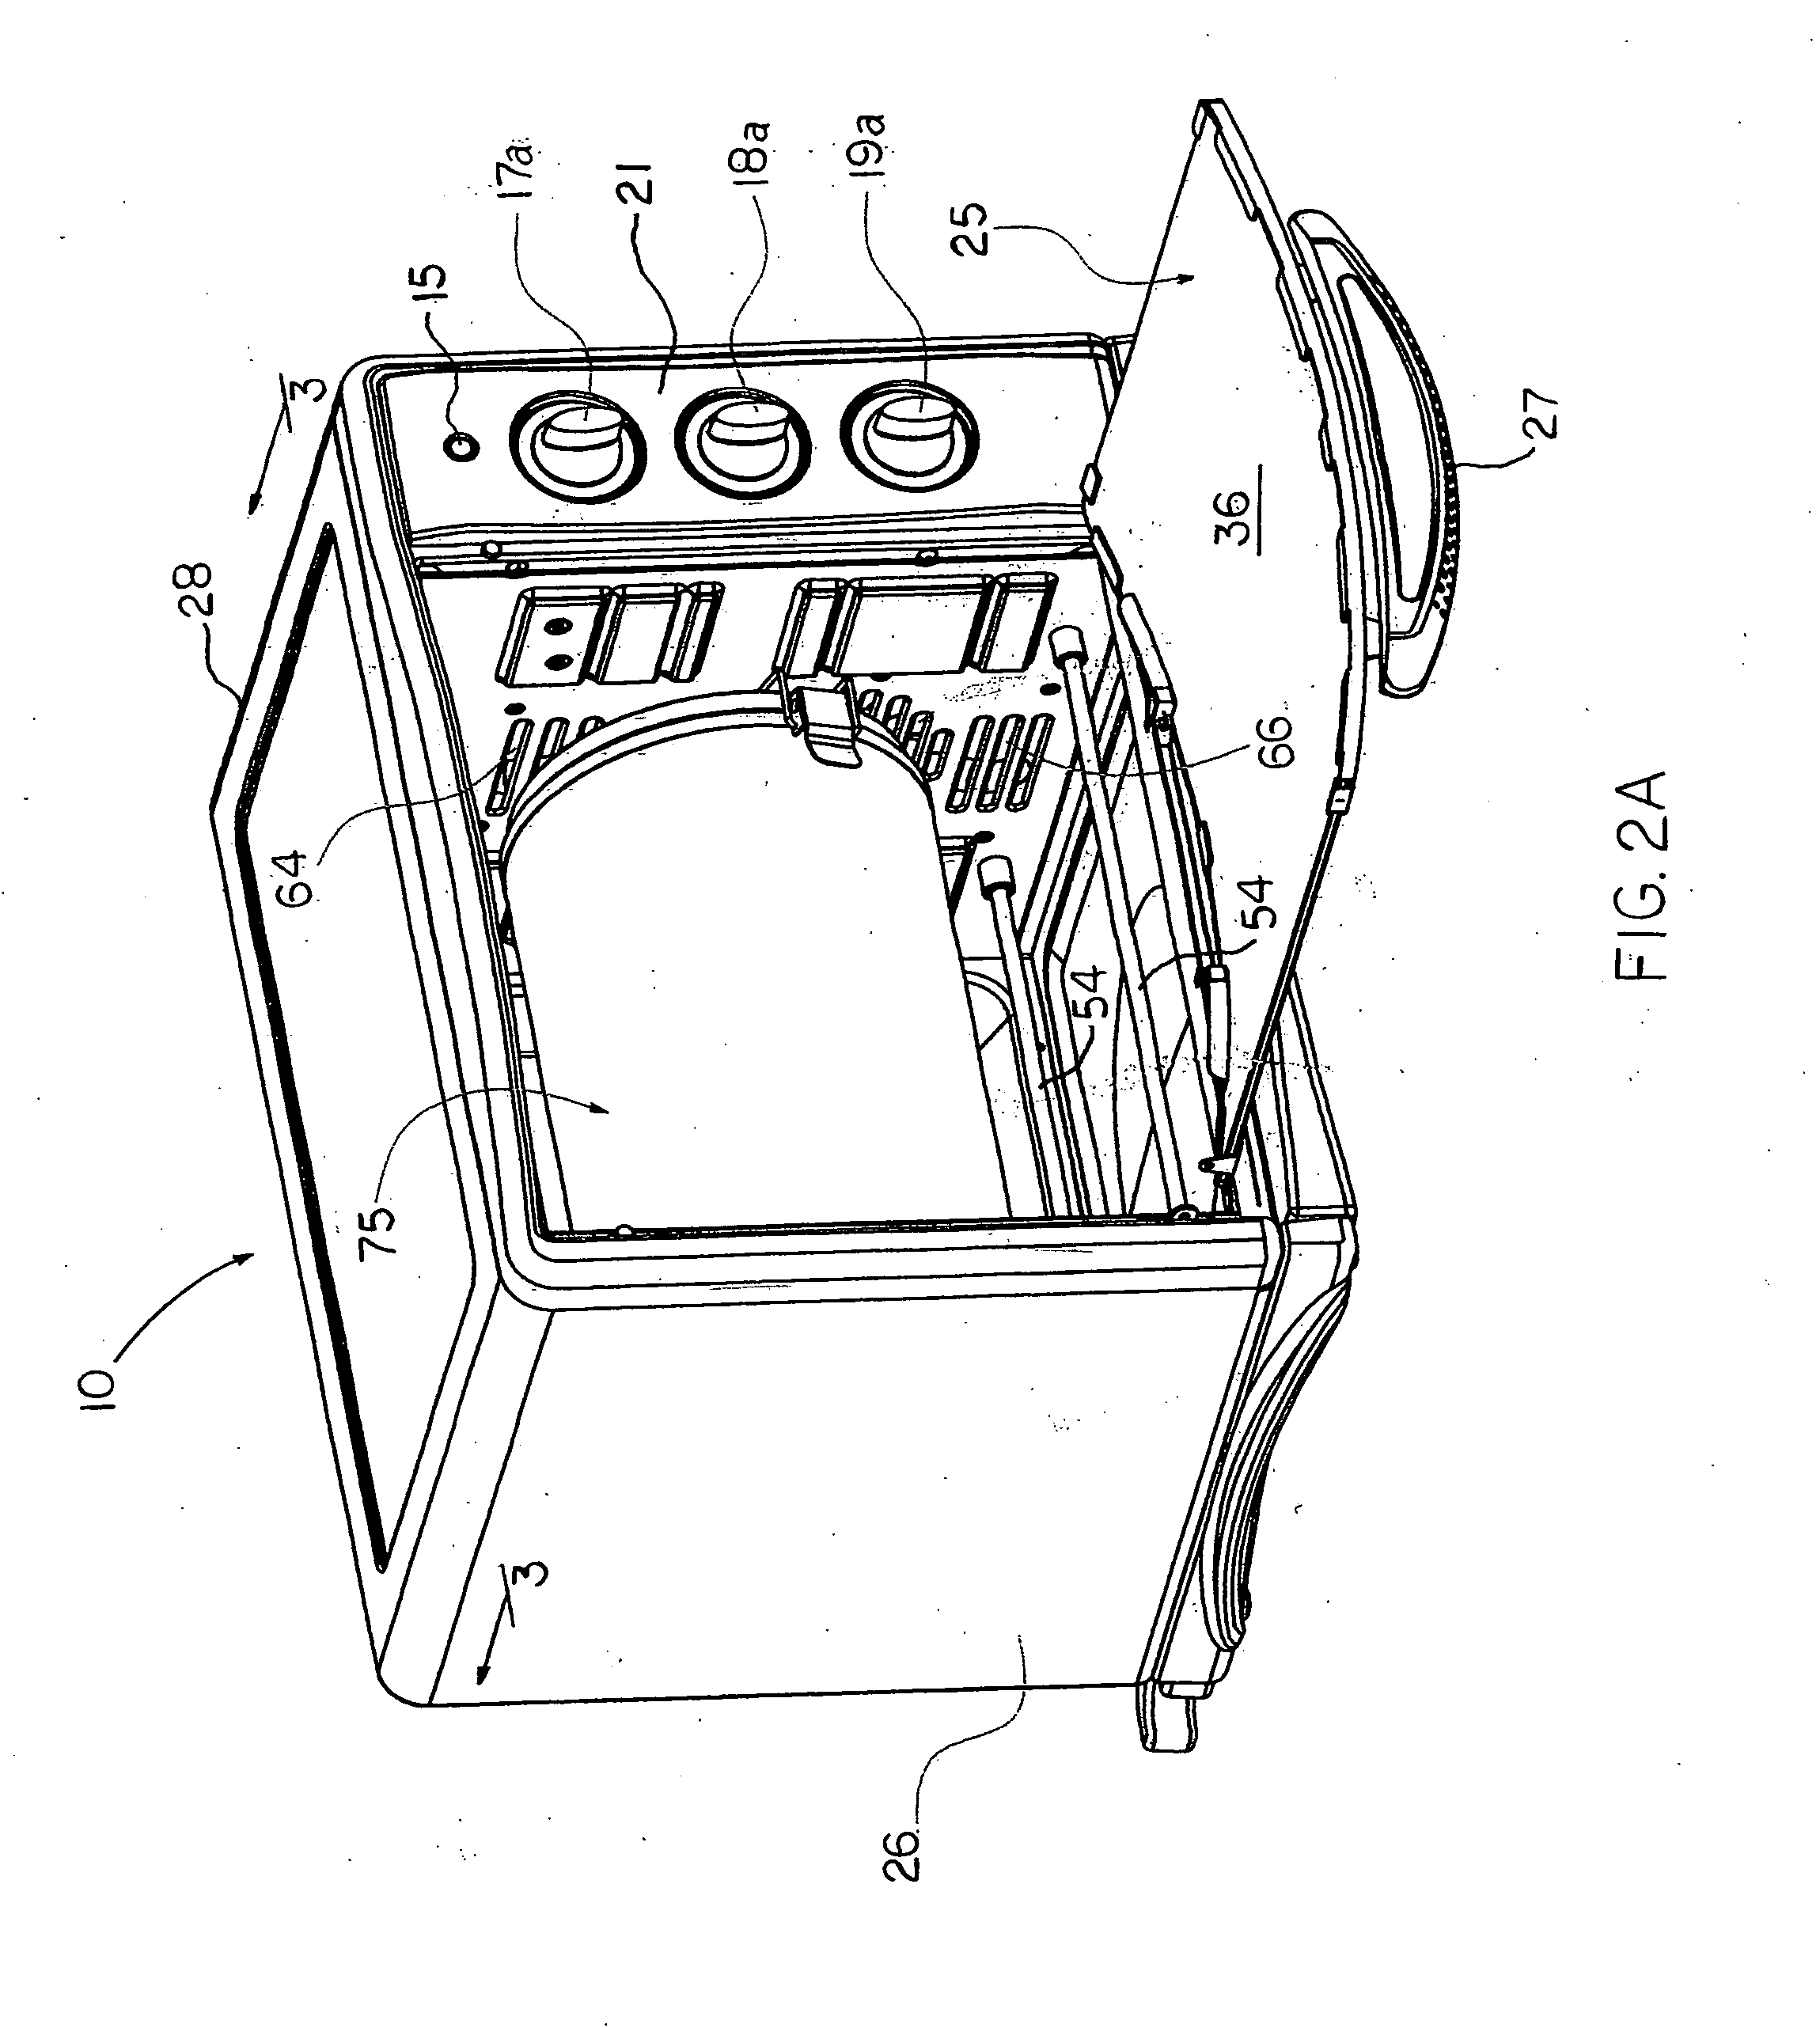 Rotisserie convection oven with rotatable cooking drum and method of use